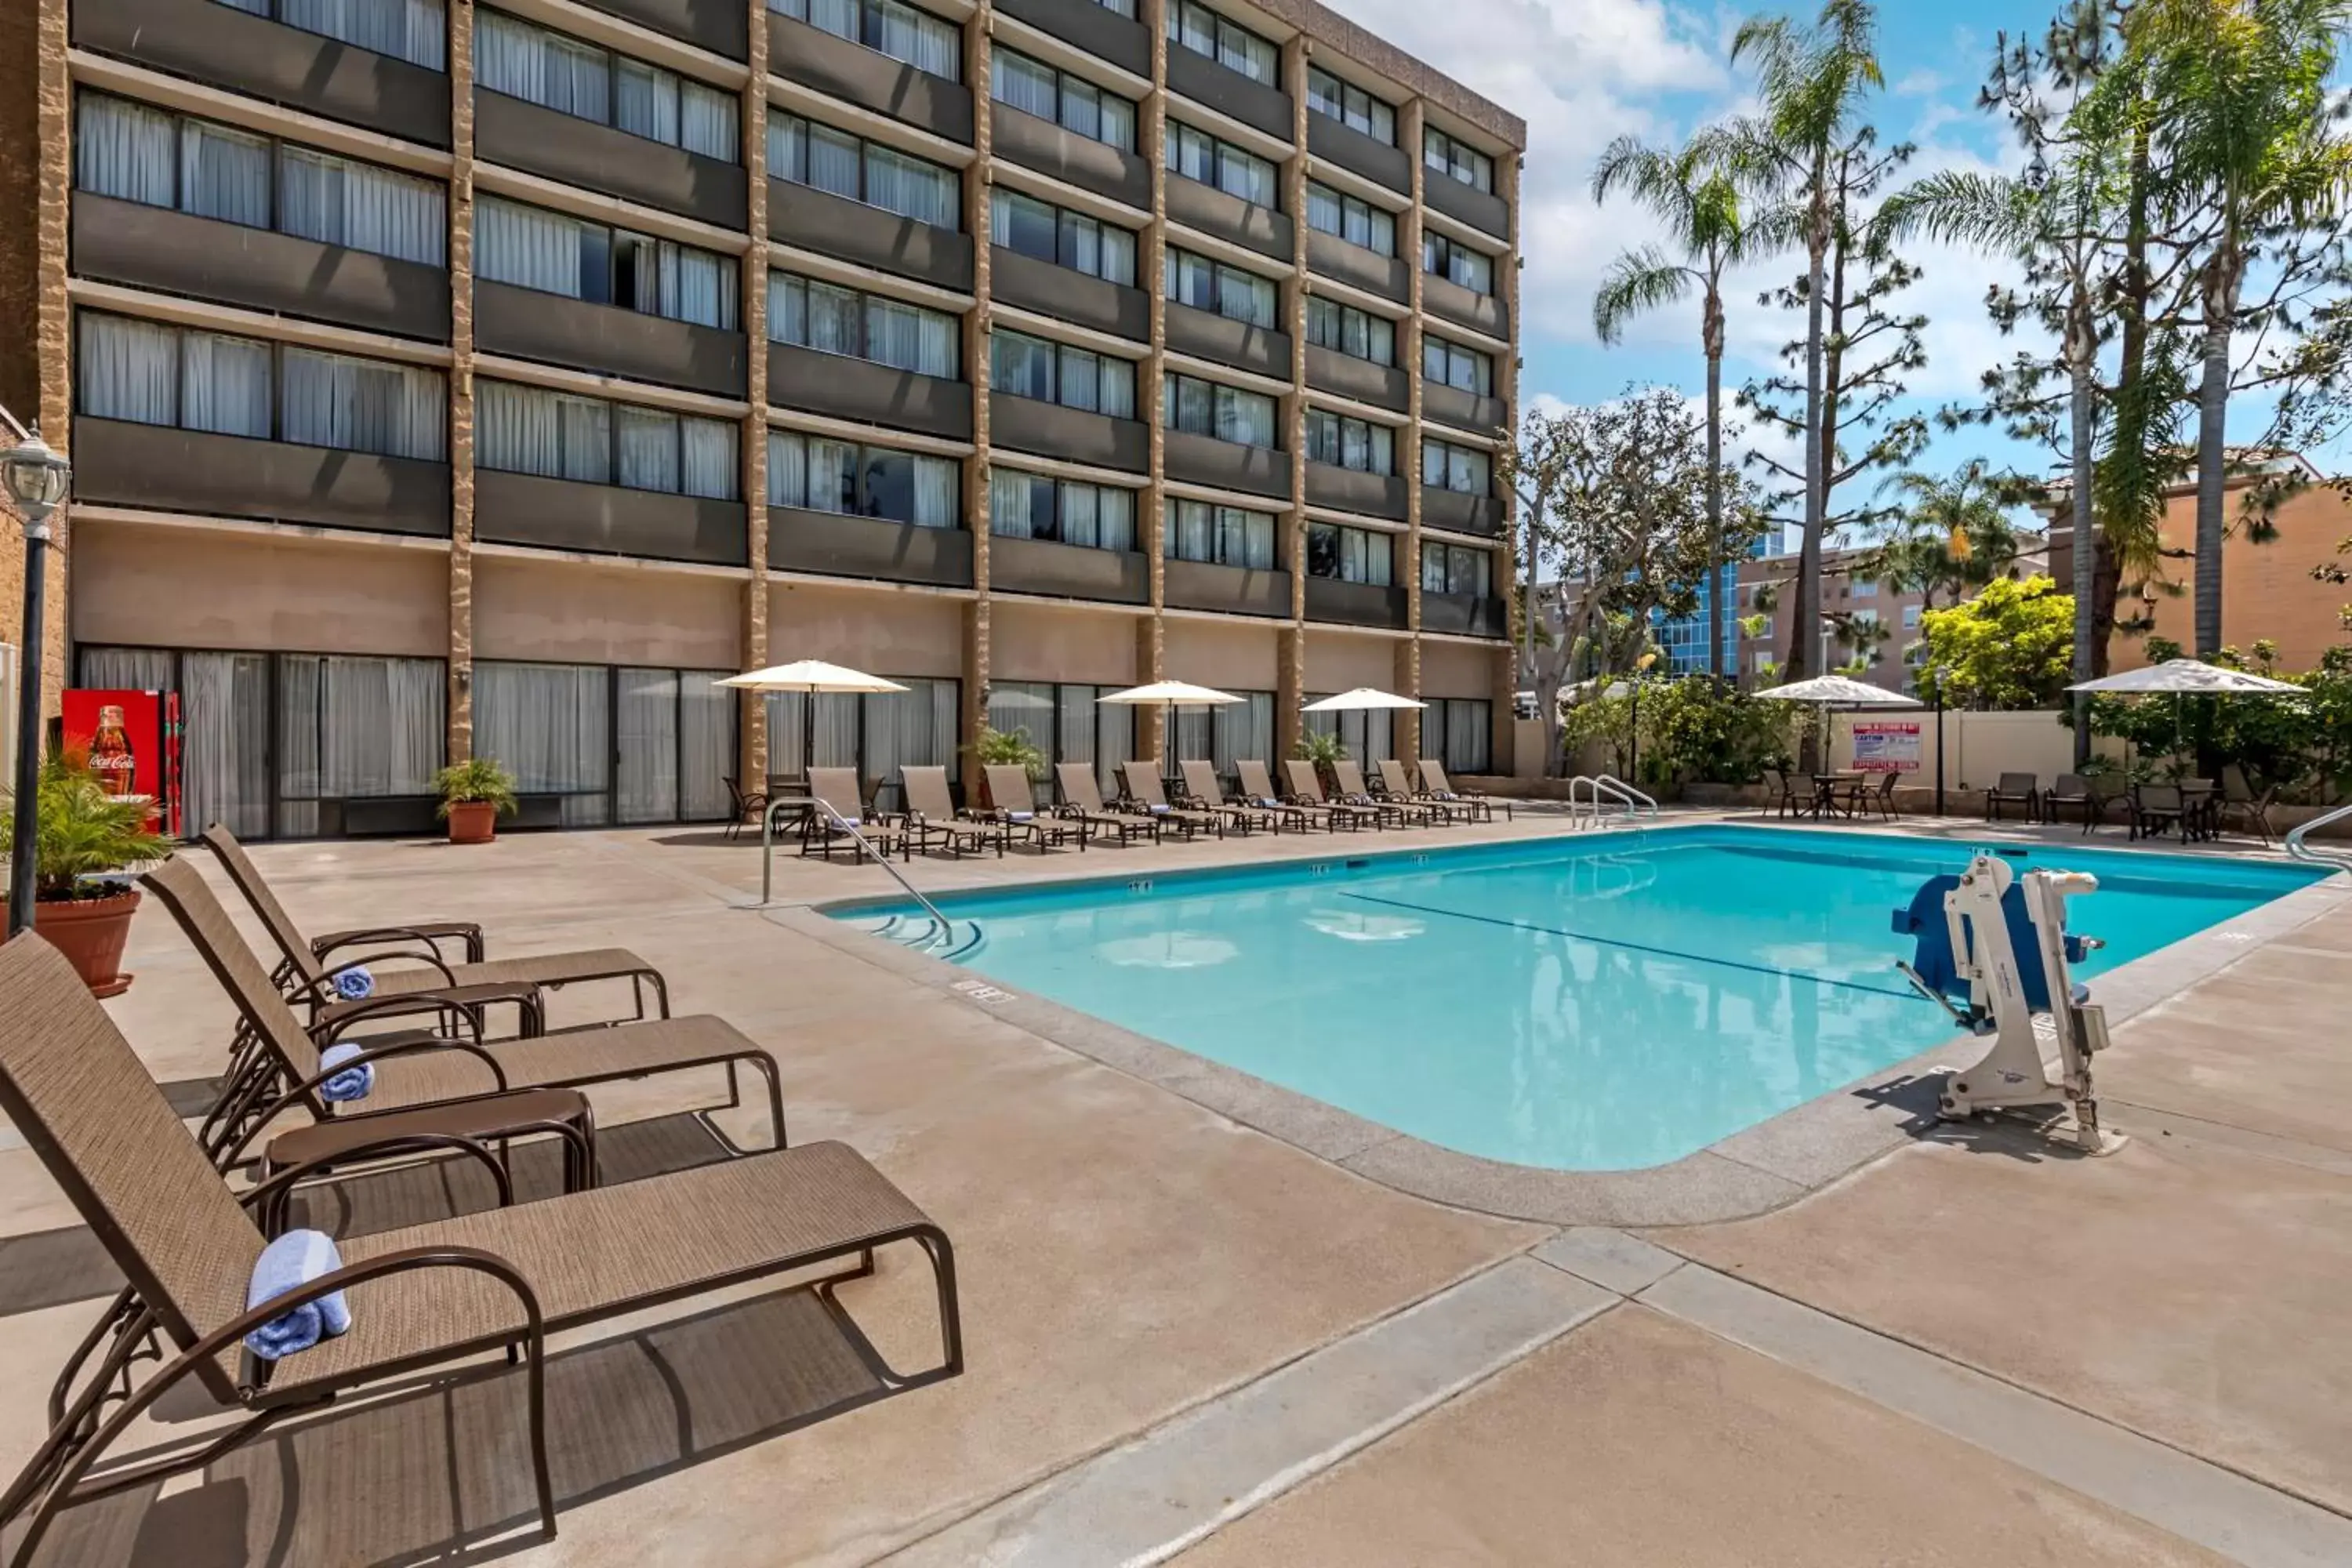 Swimming Pool in Clarion Hotel Anaheim Resort